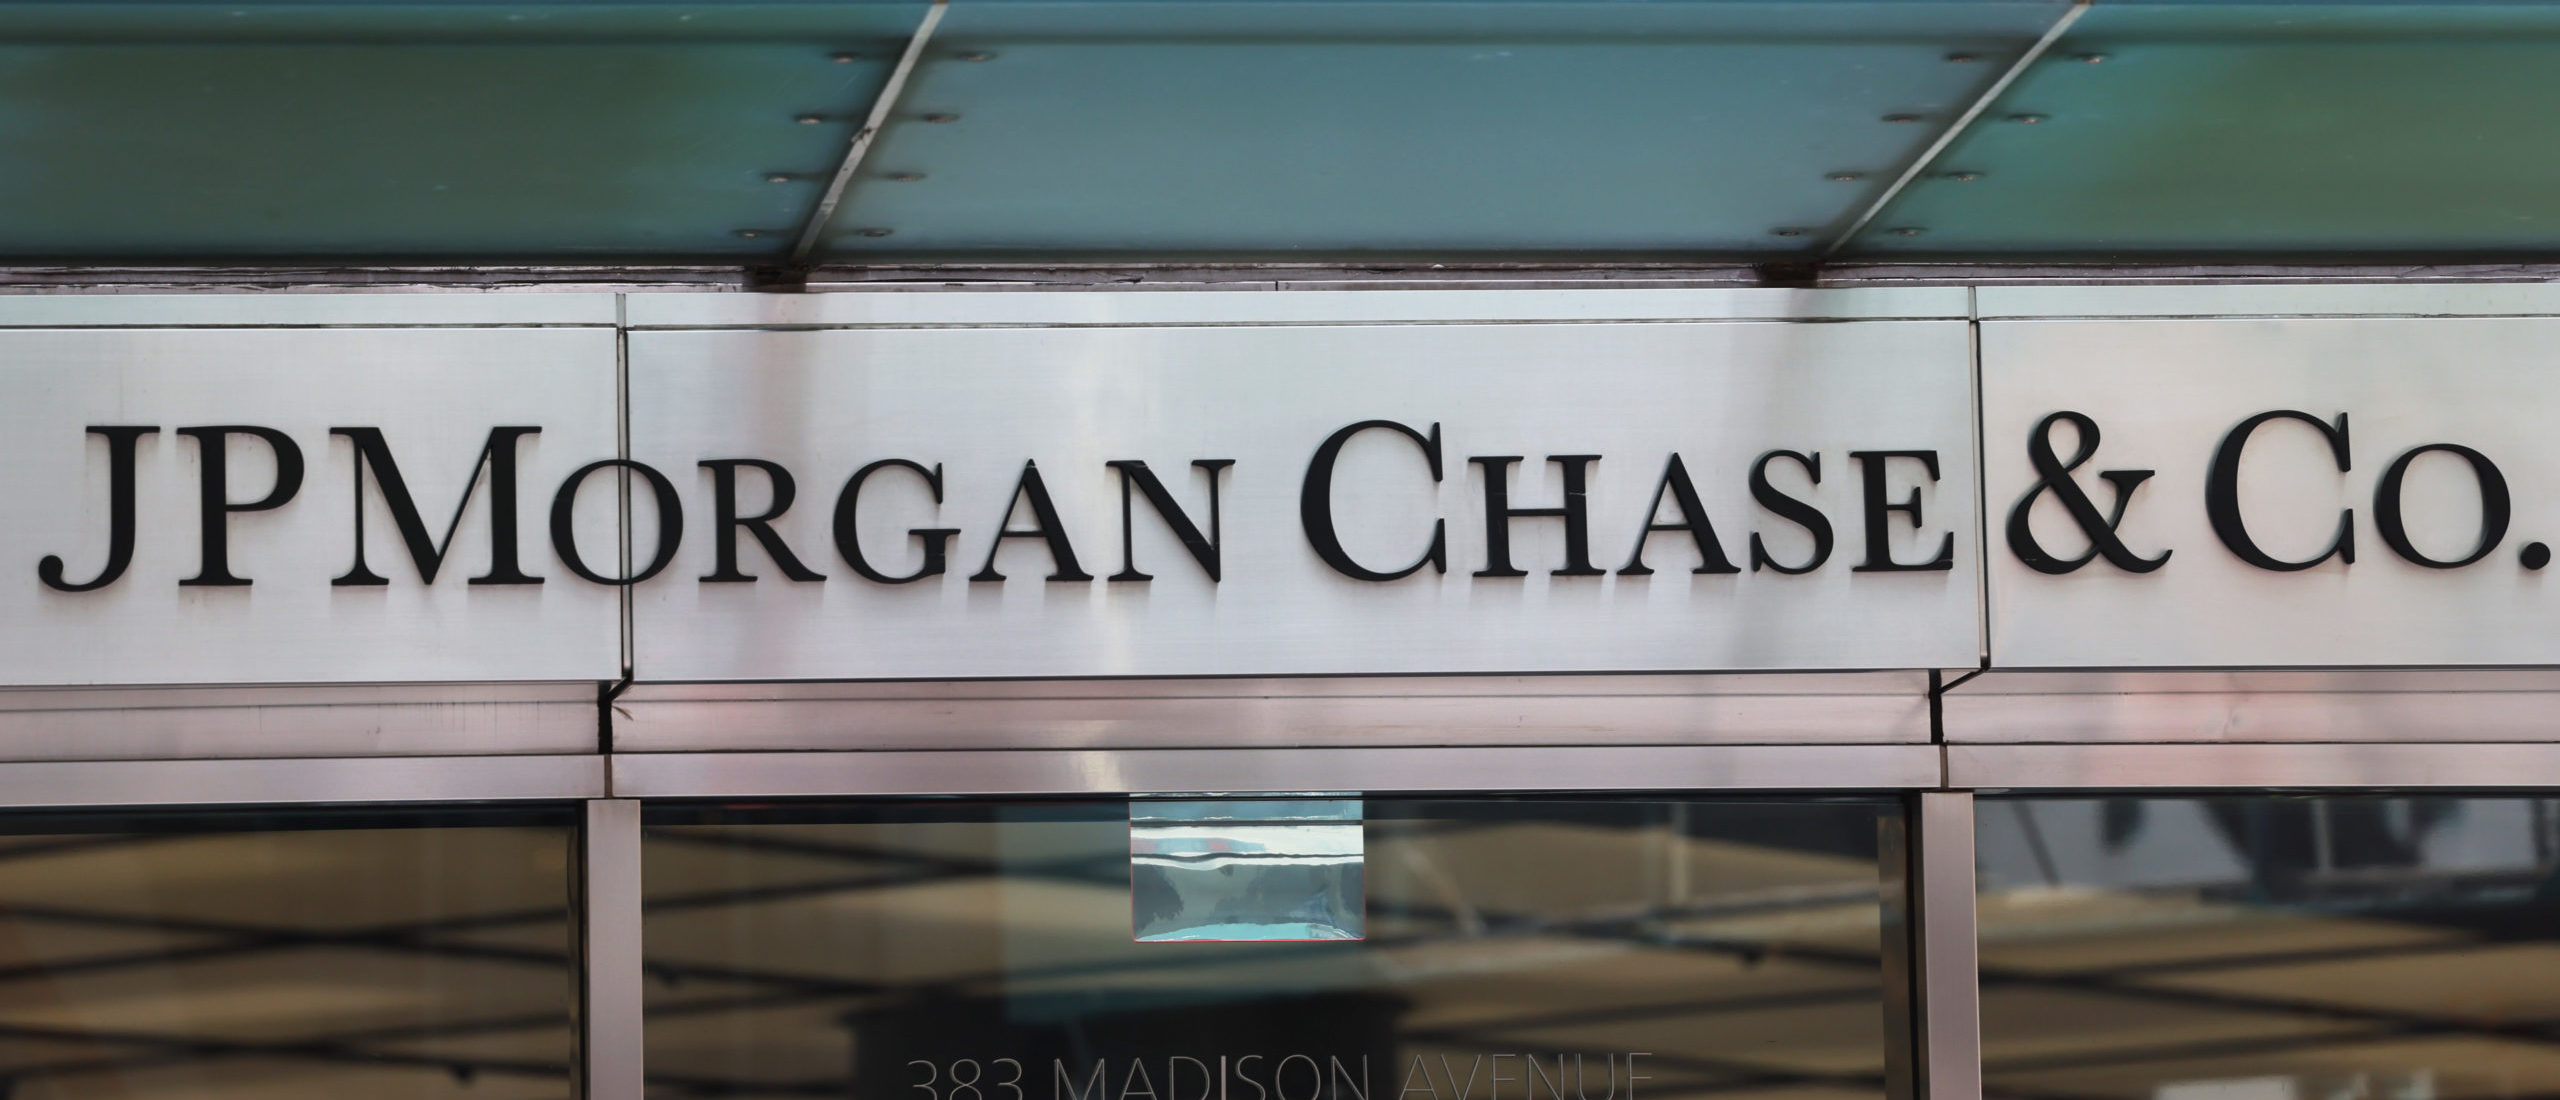 Jpmorgan Chase Agrees To Pay Us Virgin Islands 75 Million To Settle Jeffrey Epstein Lawsuit 8013